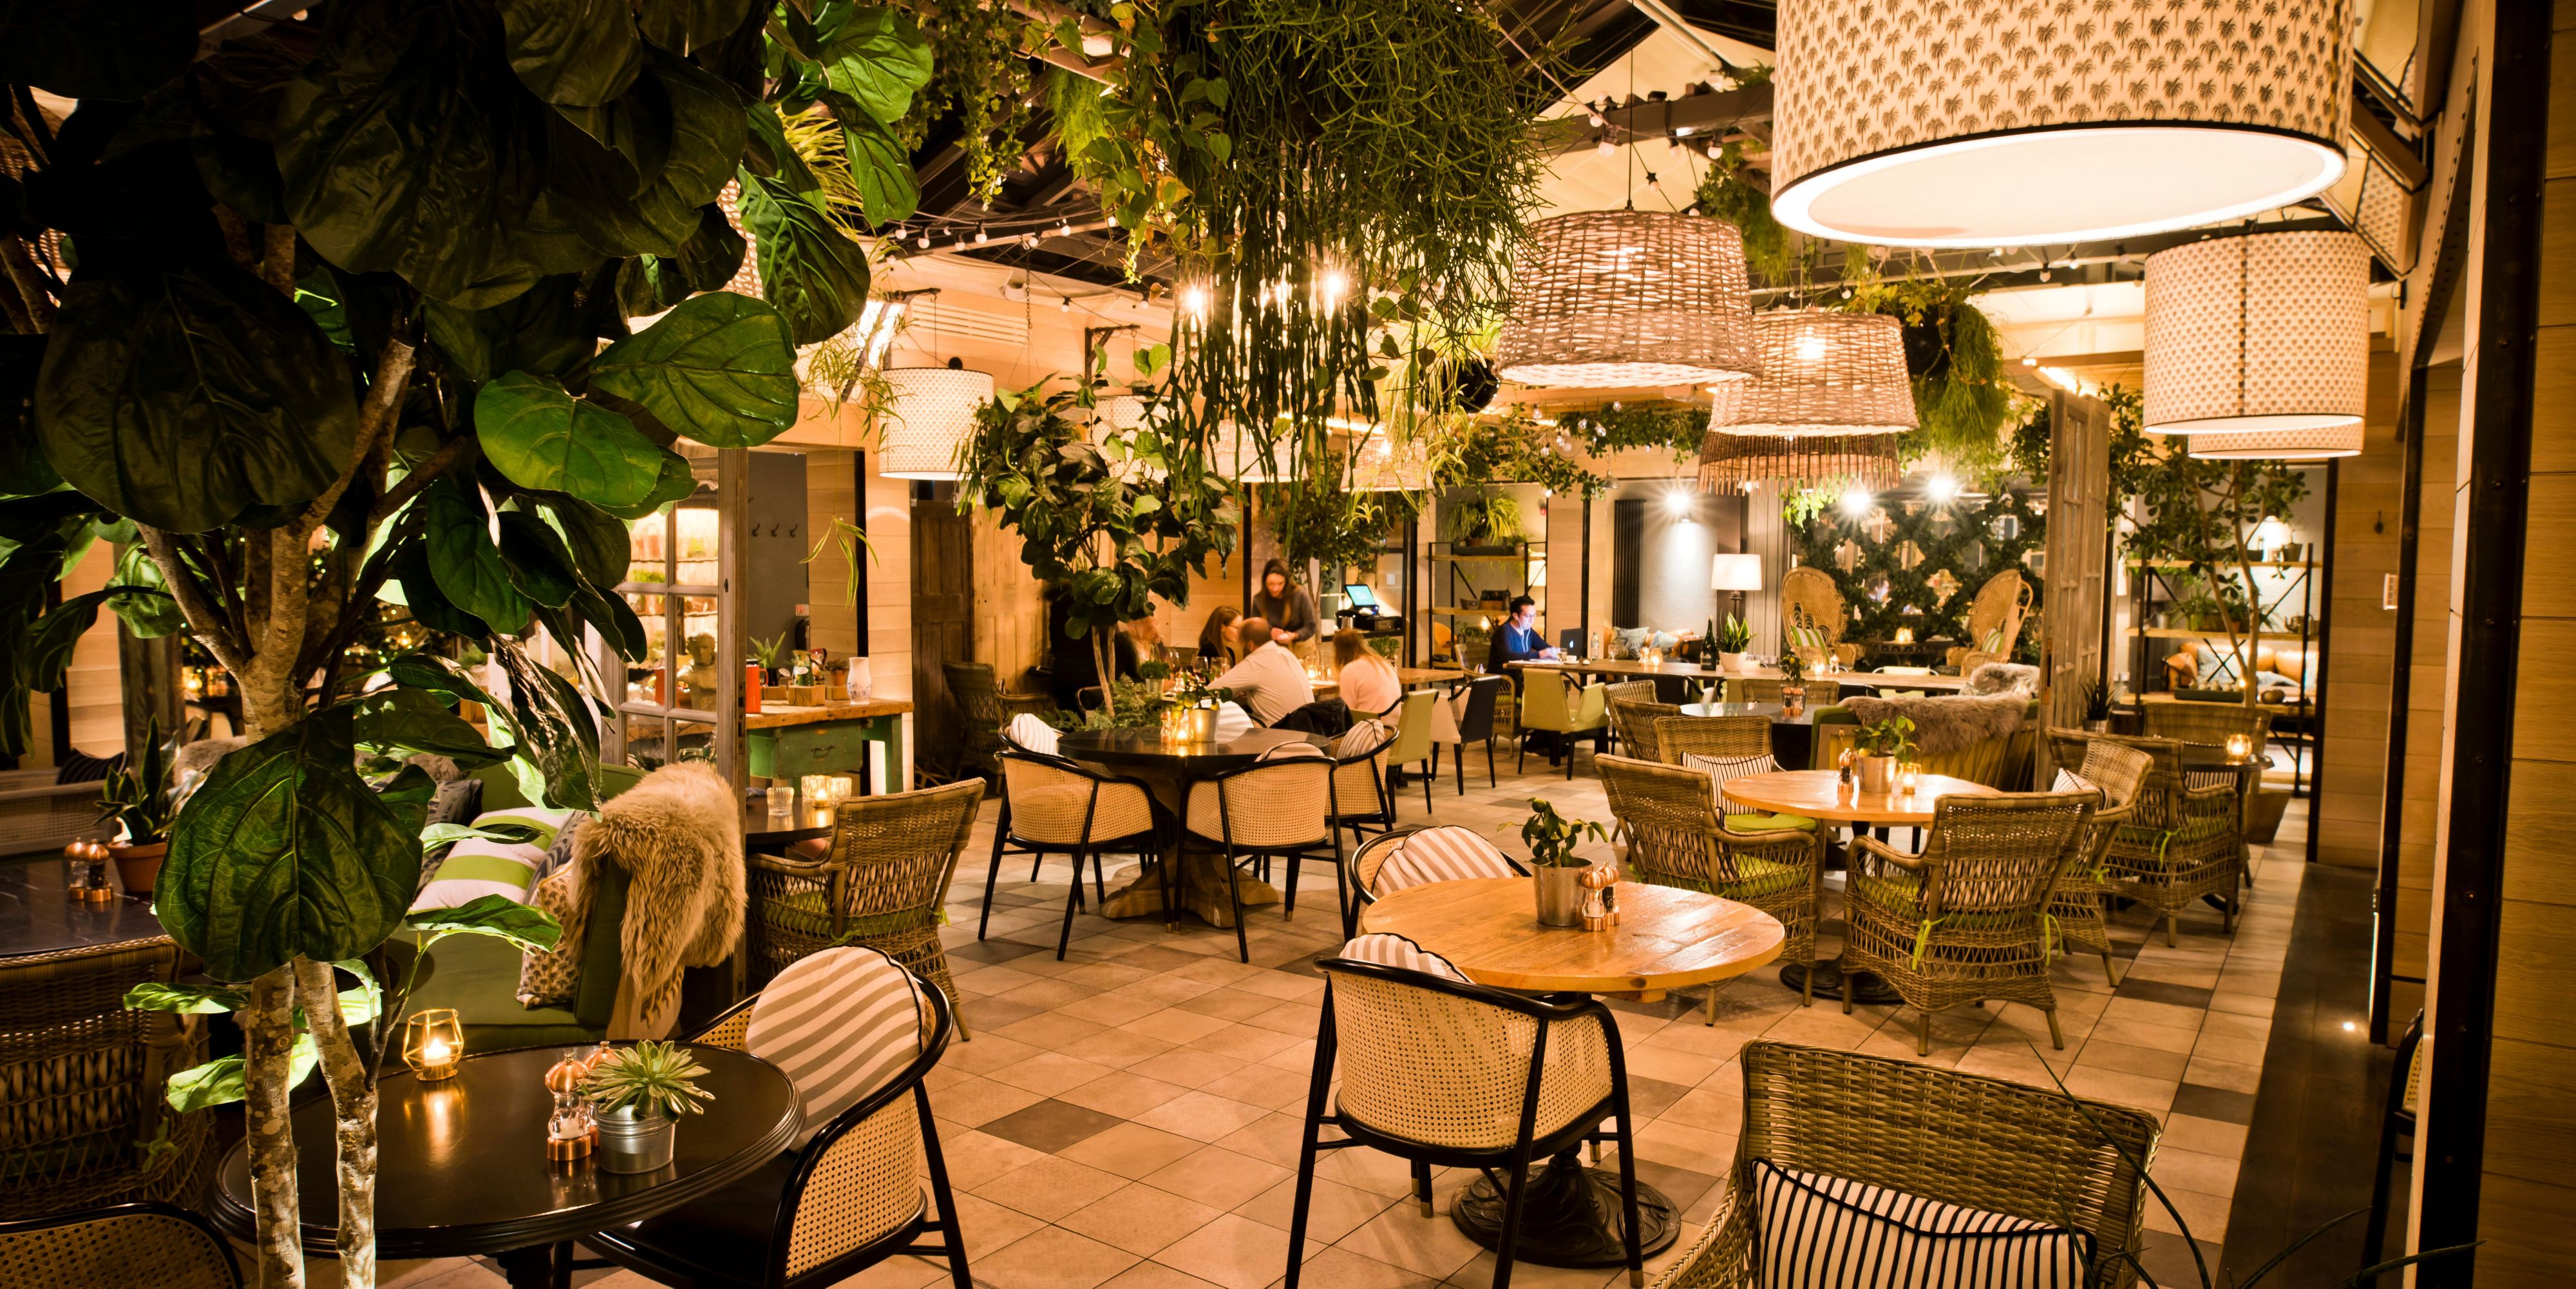 Cosy up with a cocktail in the magical oasis of The Garden.